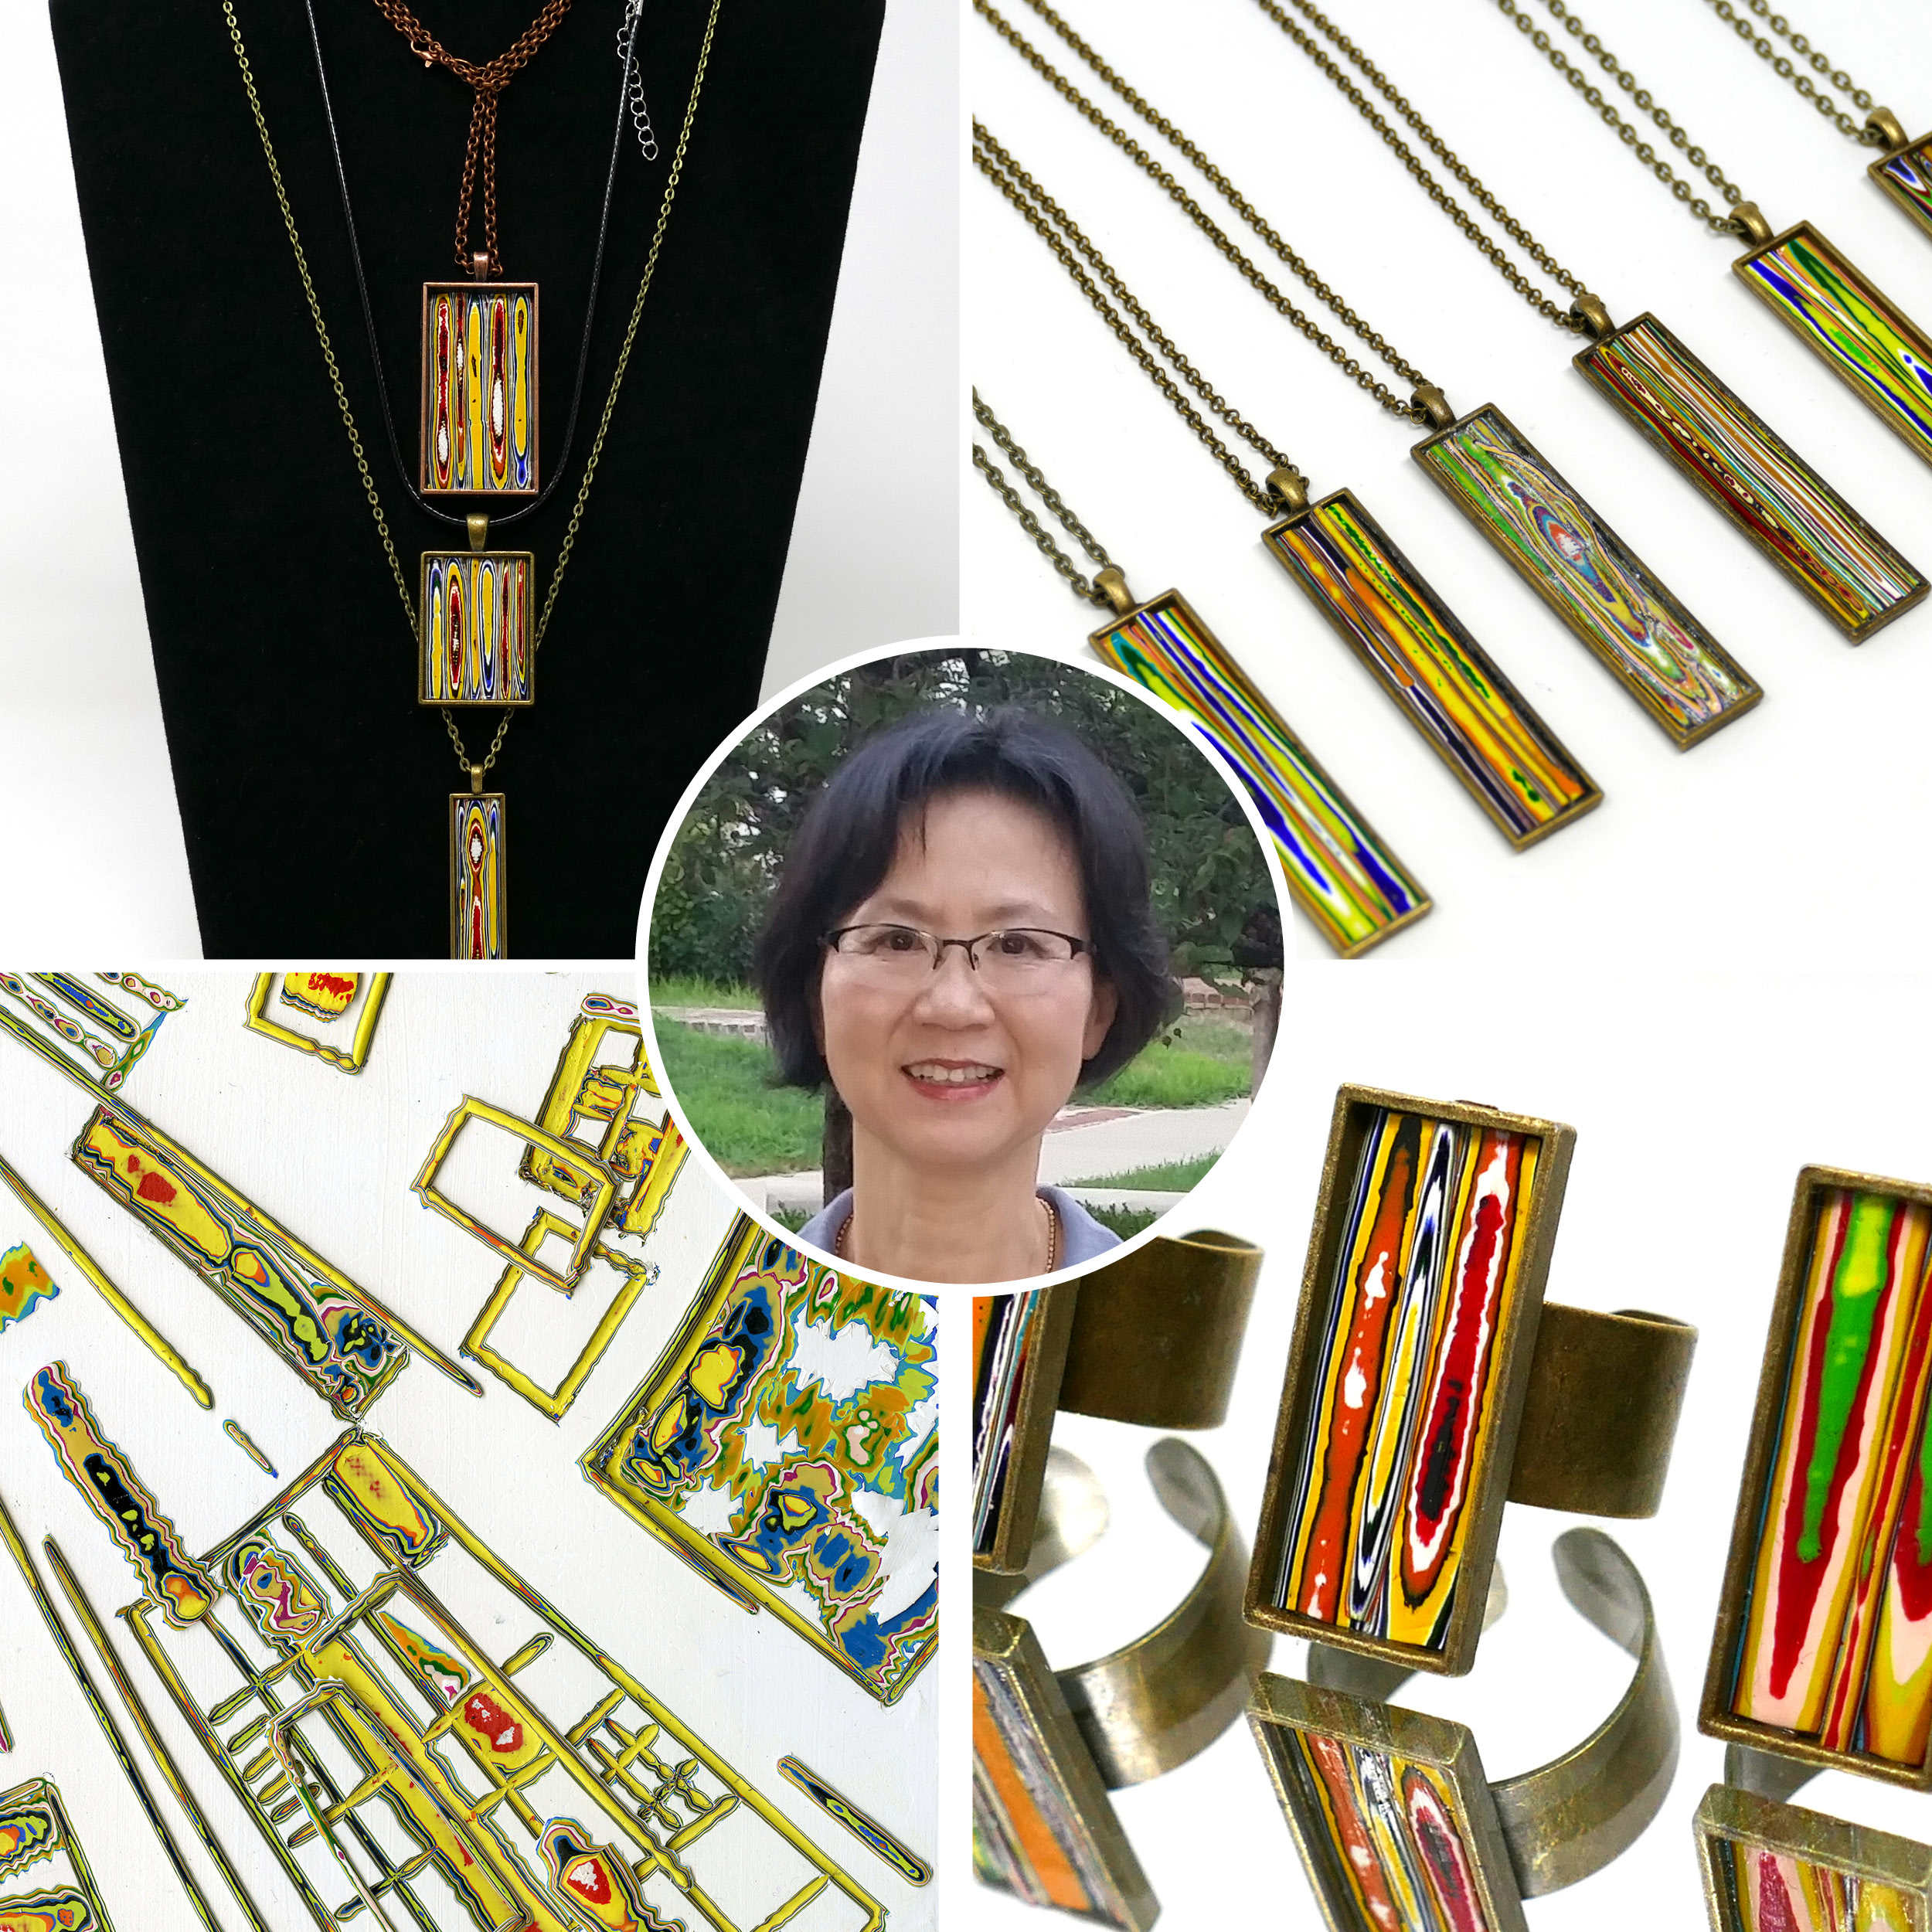 Woman with short dark hair and glasses; jewelry samples